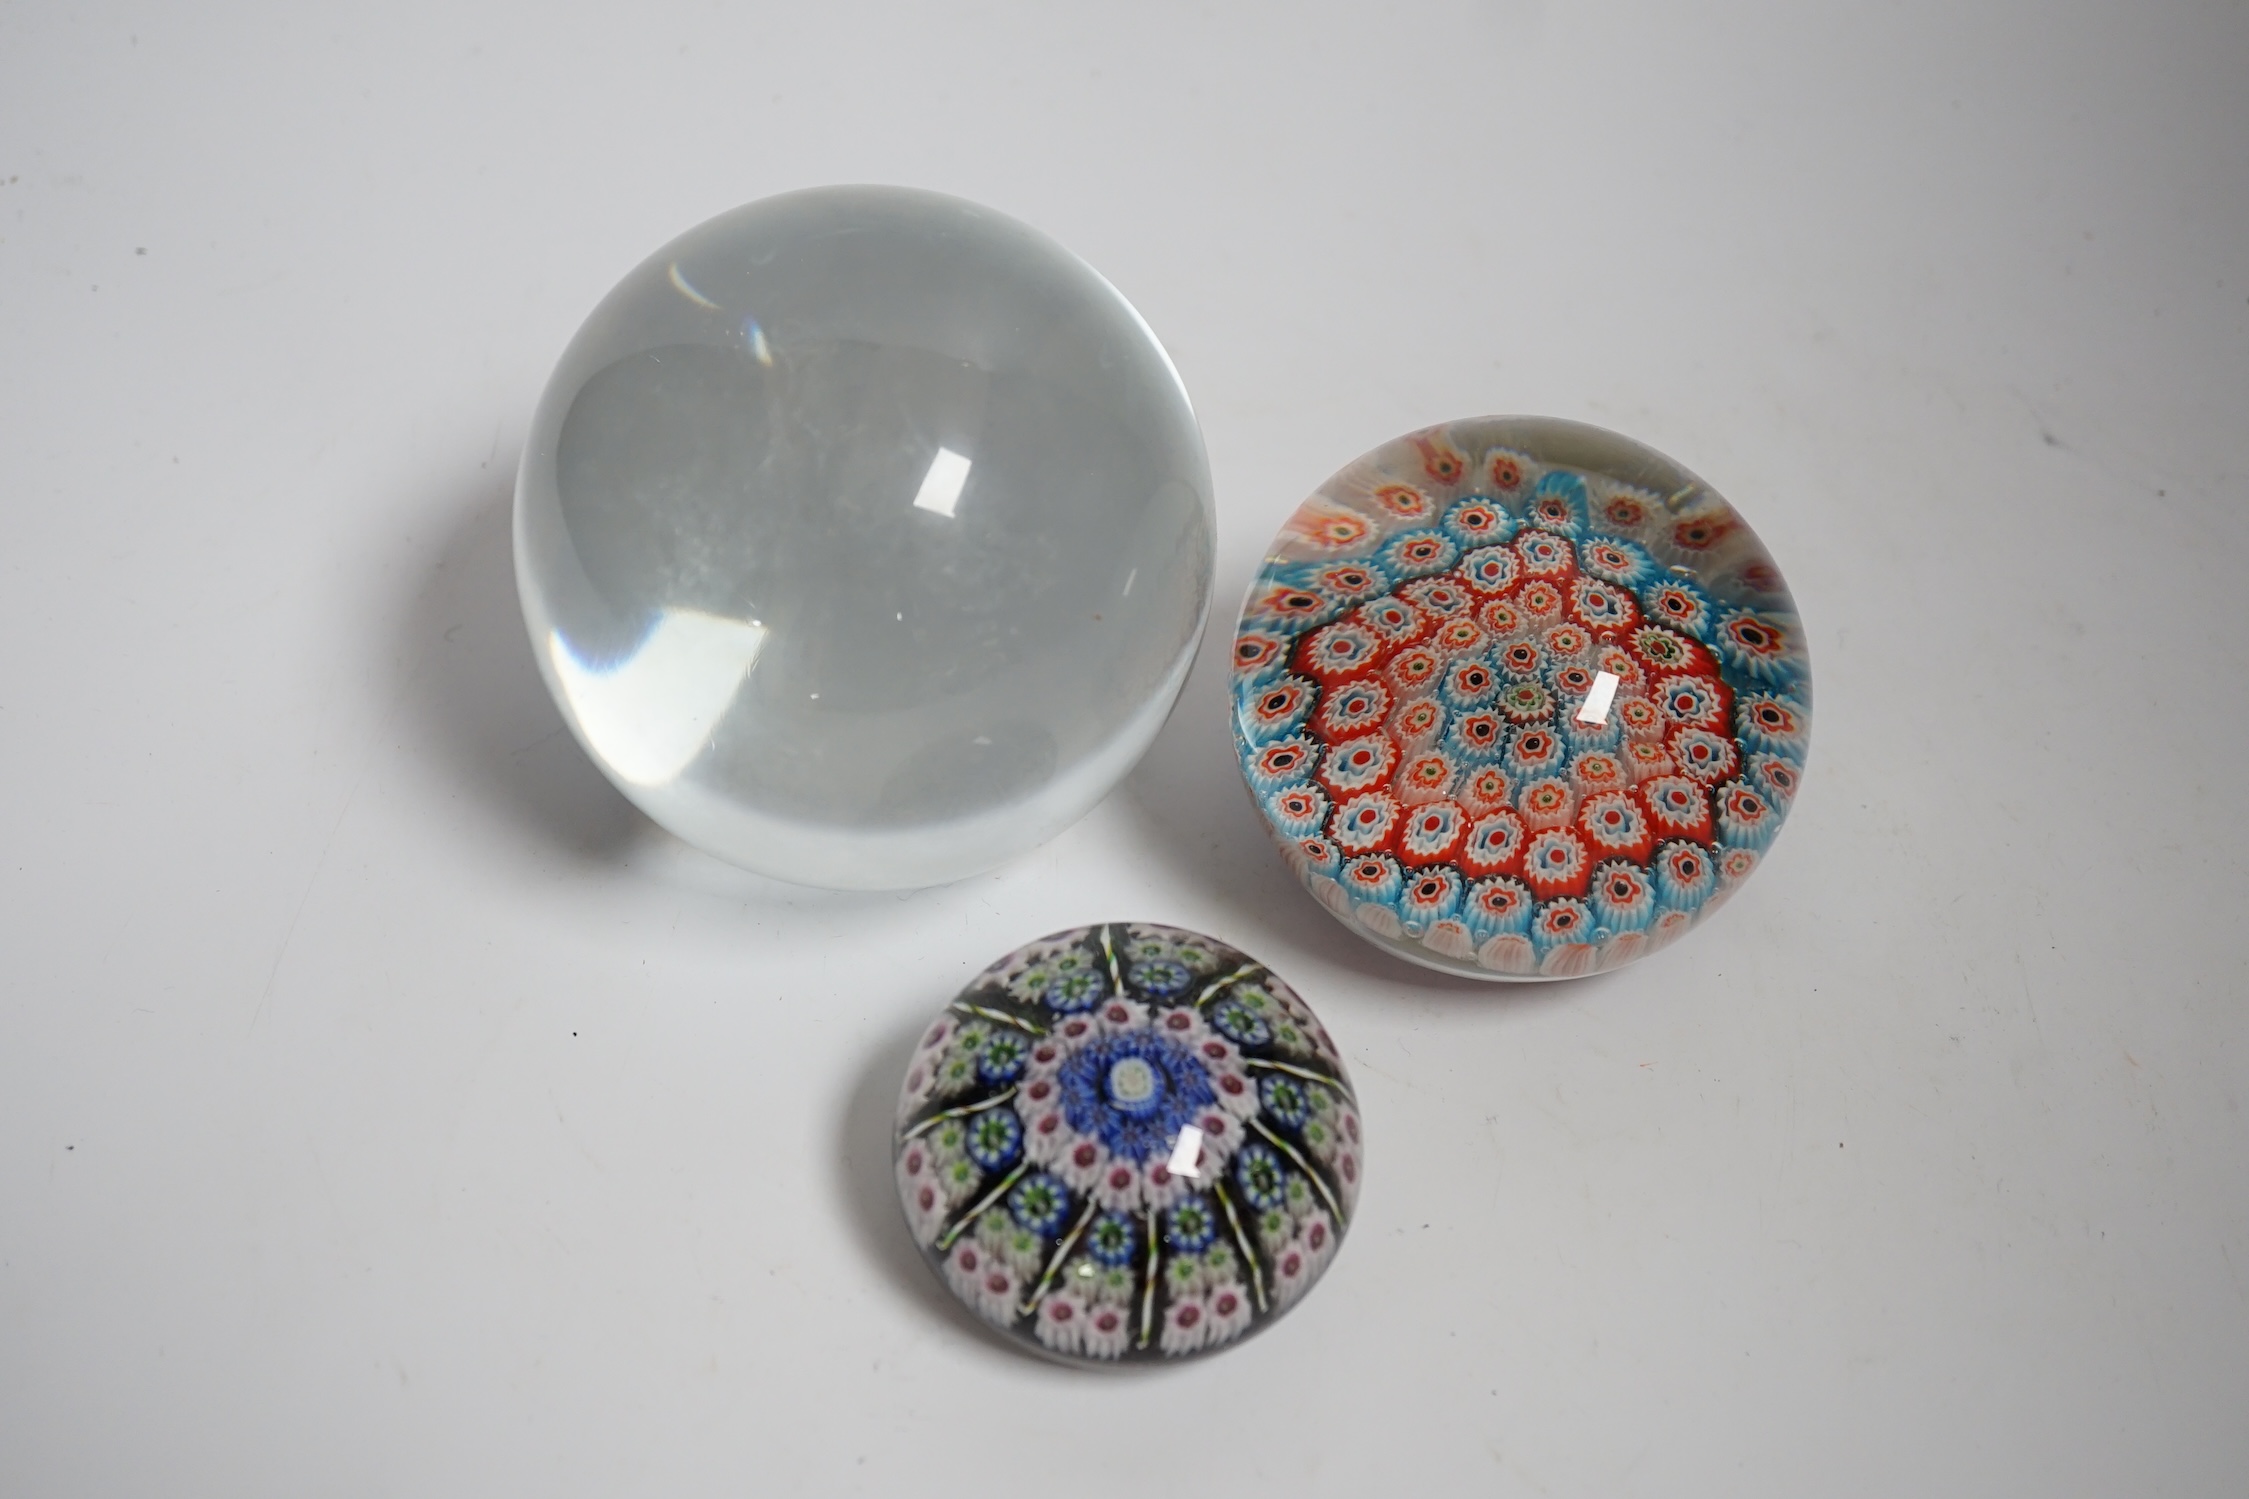 Two millefiori paperweights and a glass ball, largest 10cm in diameter